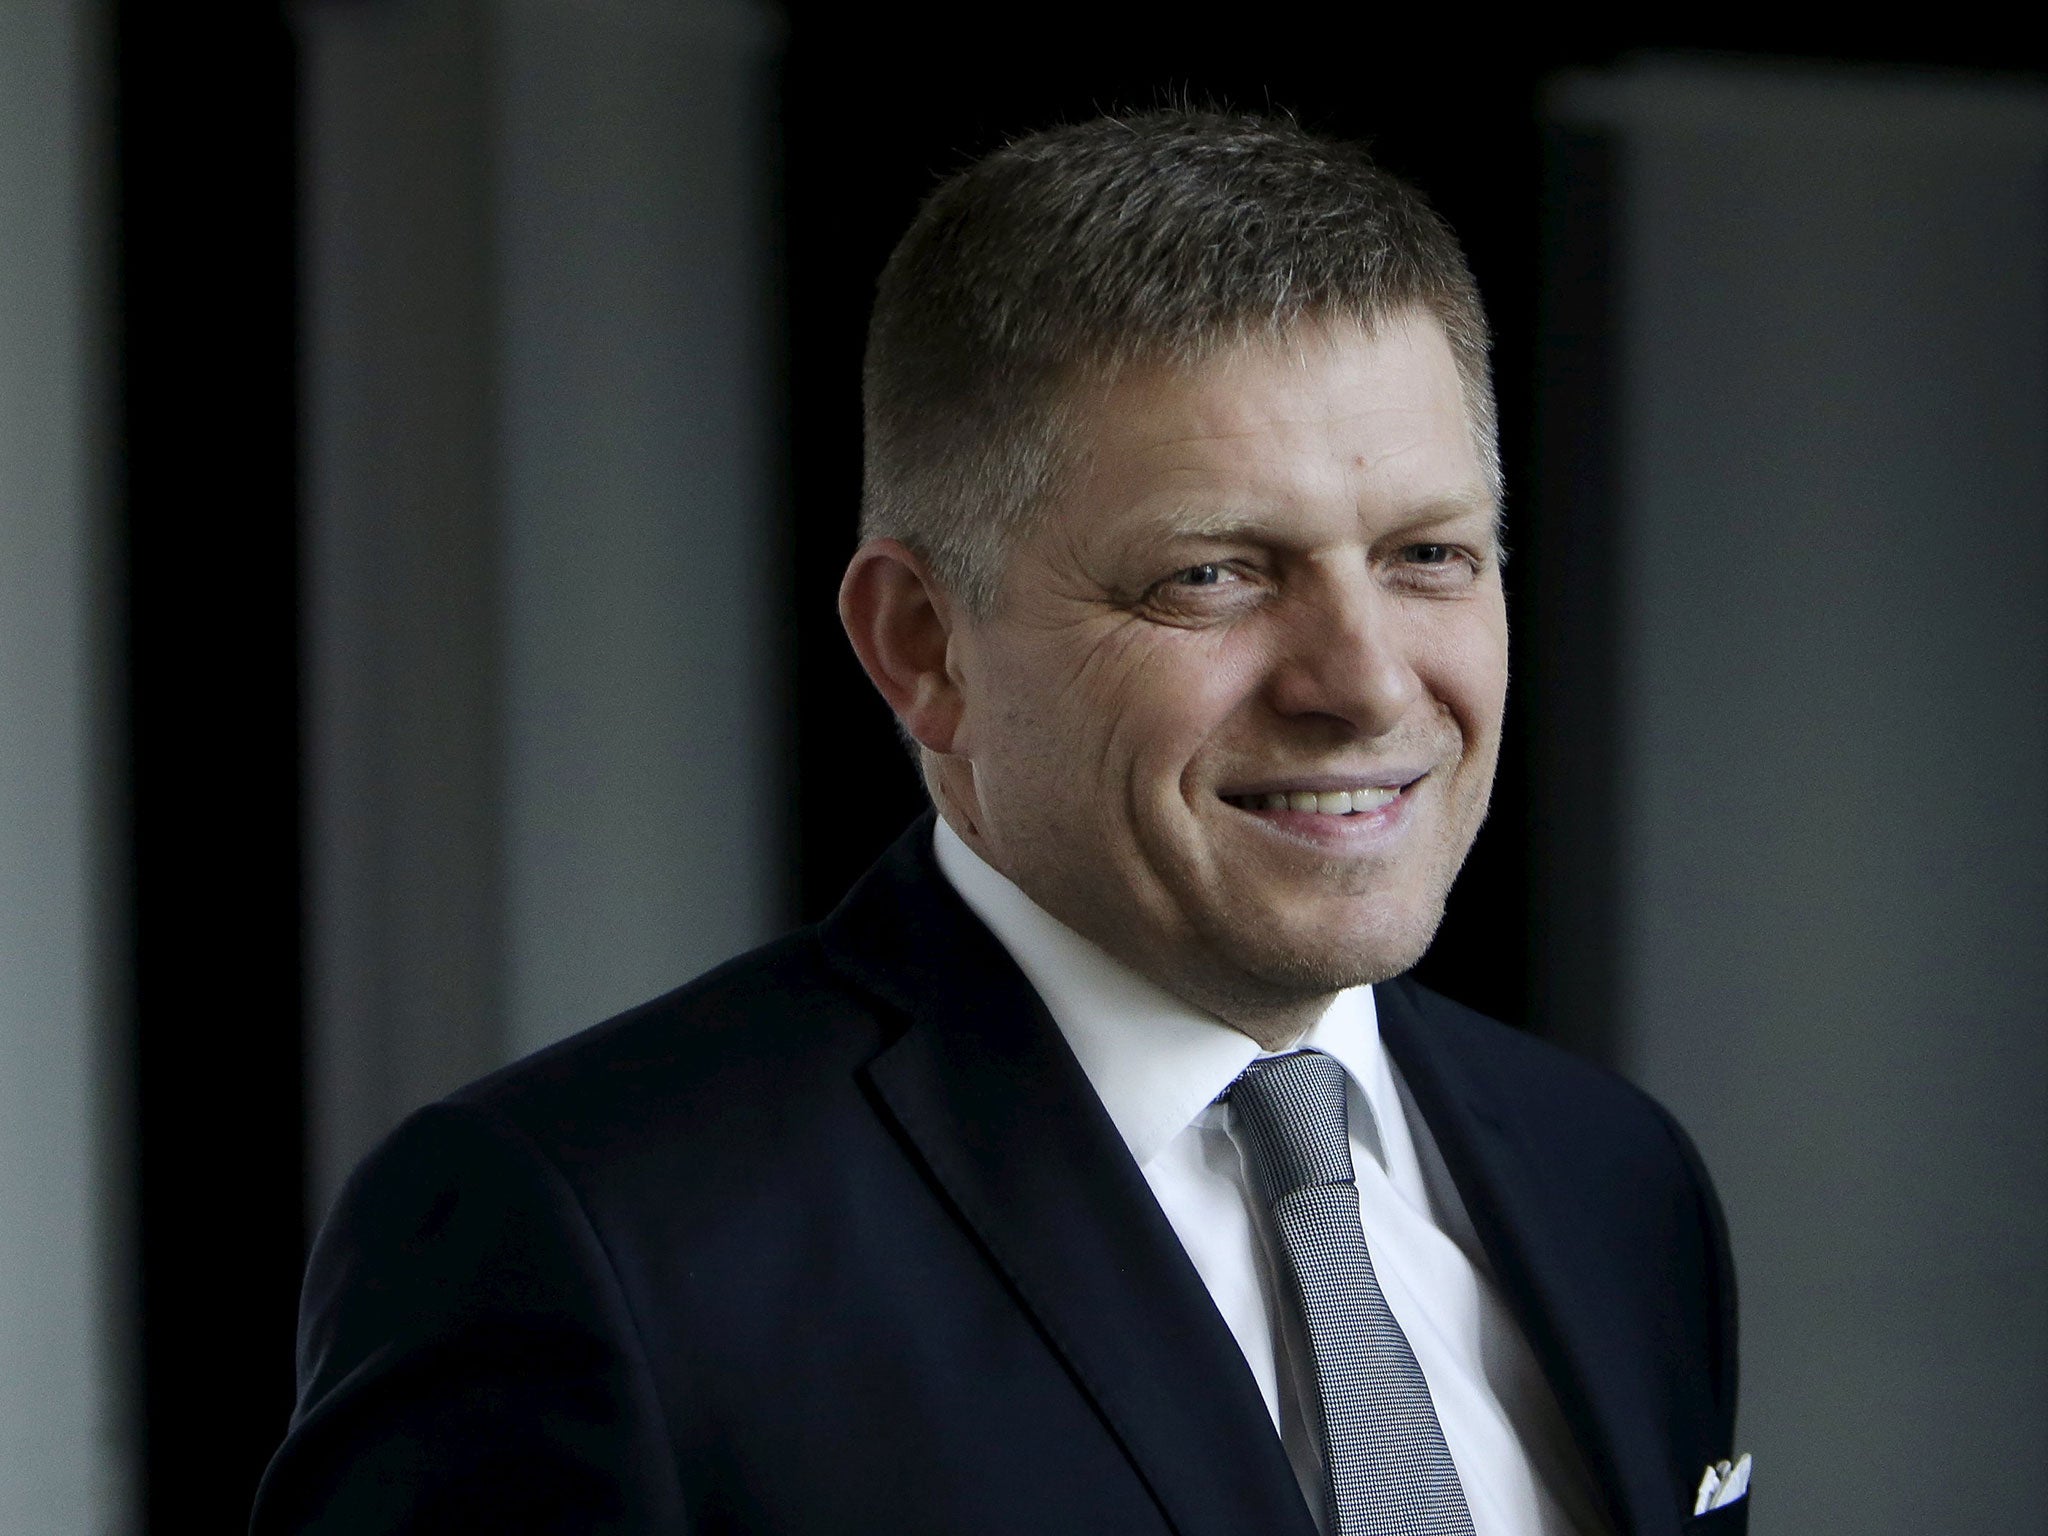 Slovakia's Prime Minister and leader of Smer party Robert Fico leaves after a live broadcast of a debate after the country's parliamentary election, in Bratislava, Slovakia